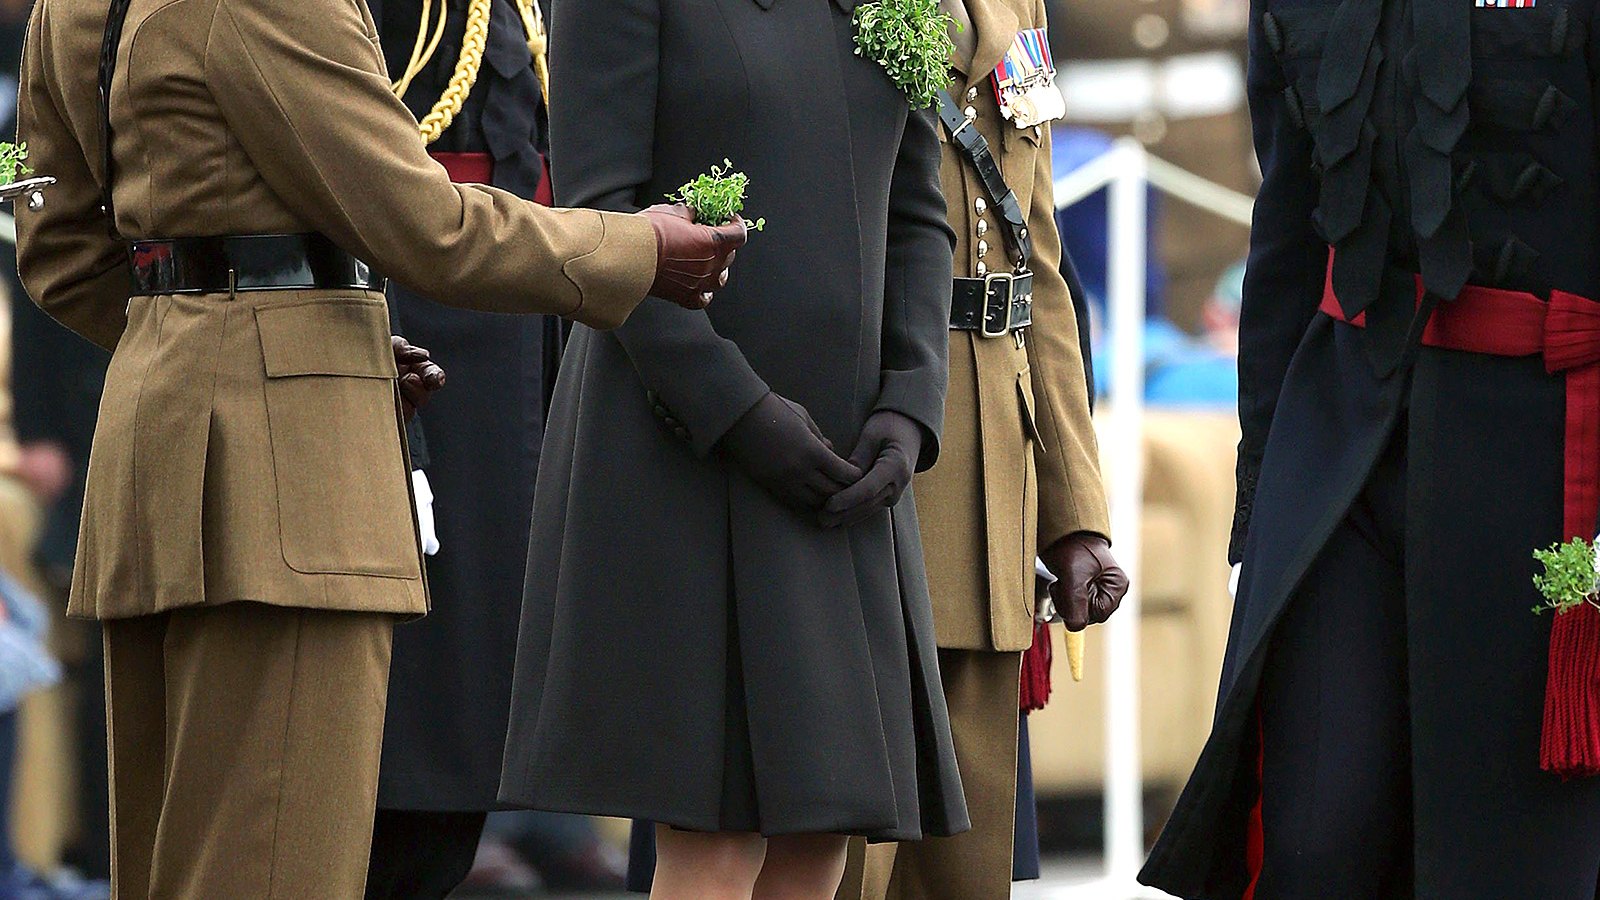 Kate Middleton at the St. Patrick's Day Parade on March 17, 2015.